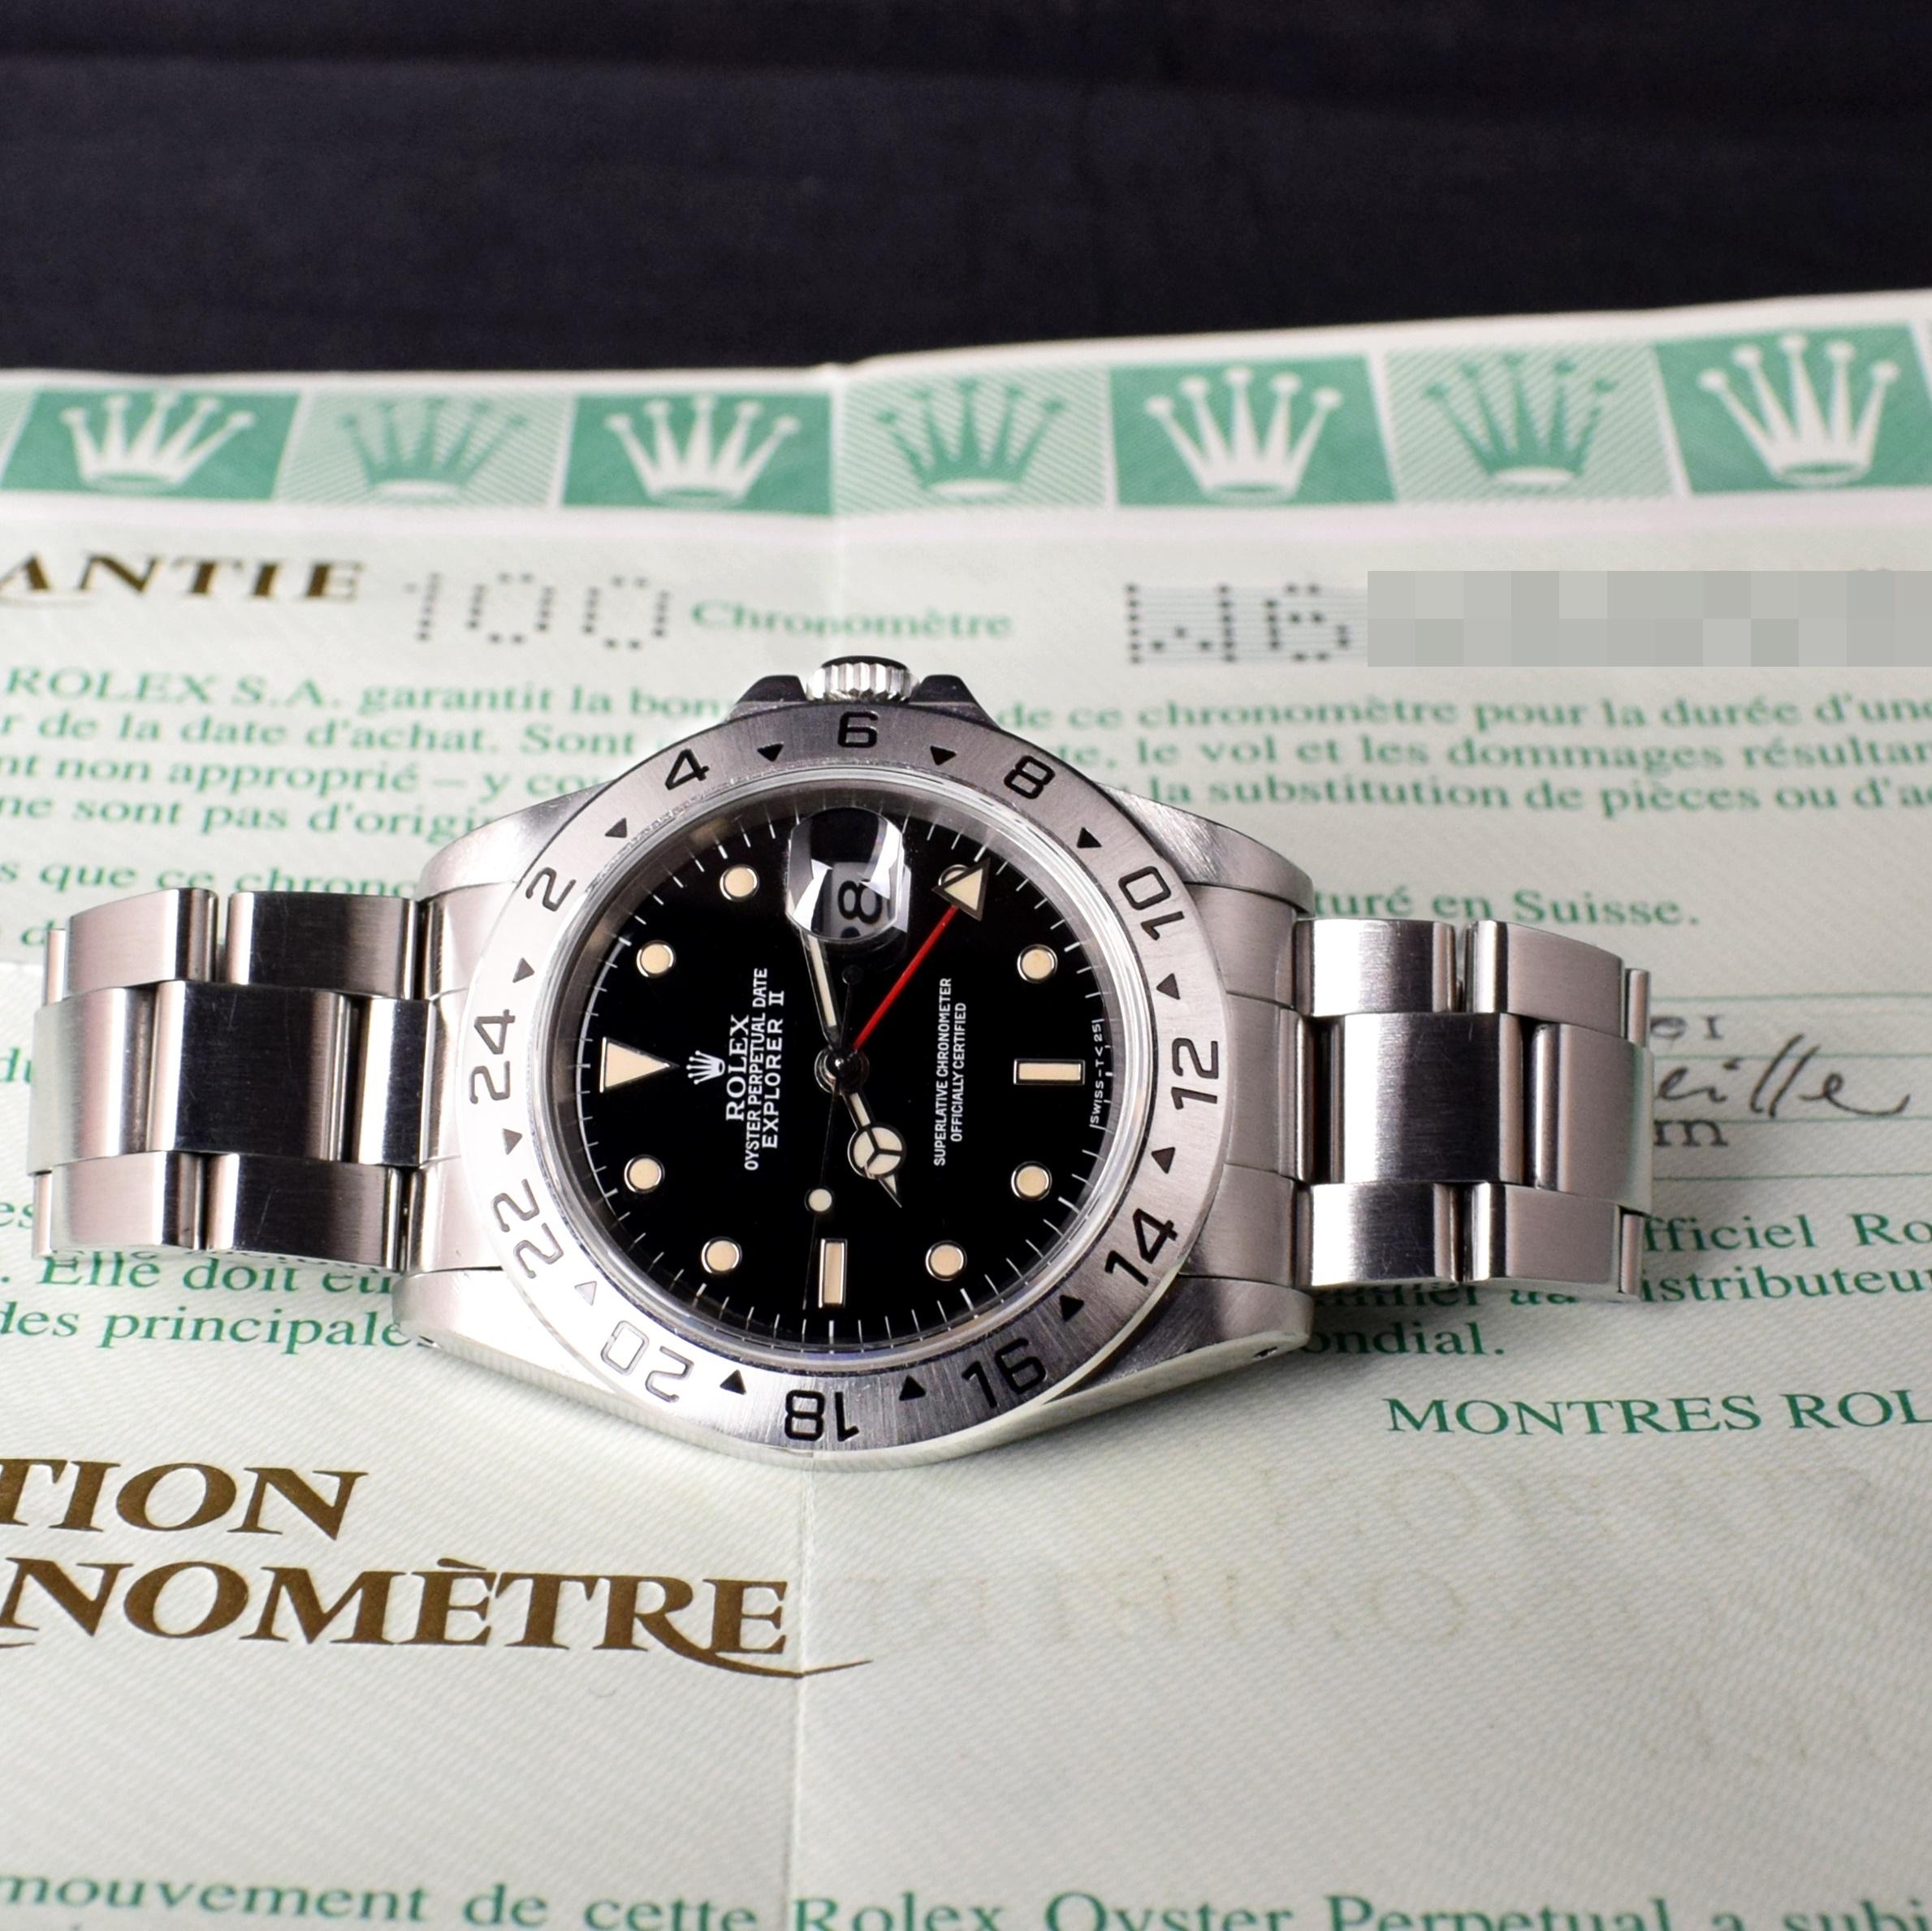 Brand: Rolex
Model: 16570
Year: 1995
Serial number: W6xxxxx
Reference: C03536

Case: Show sign of wear w/ slight polishing from previous; inner case back stamped 16570

Dial: Excellent Condition Tritium Black Dial where the lumes have turned into